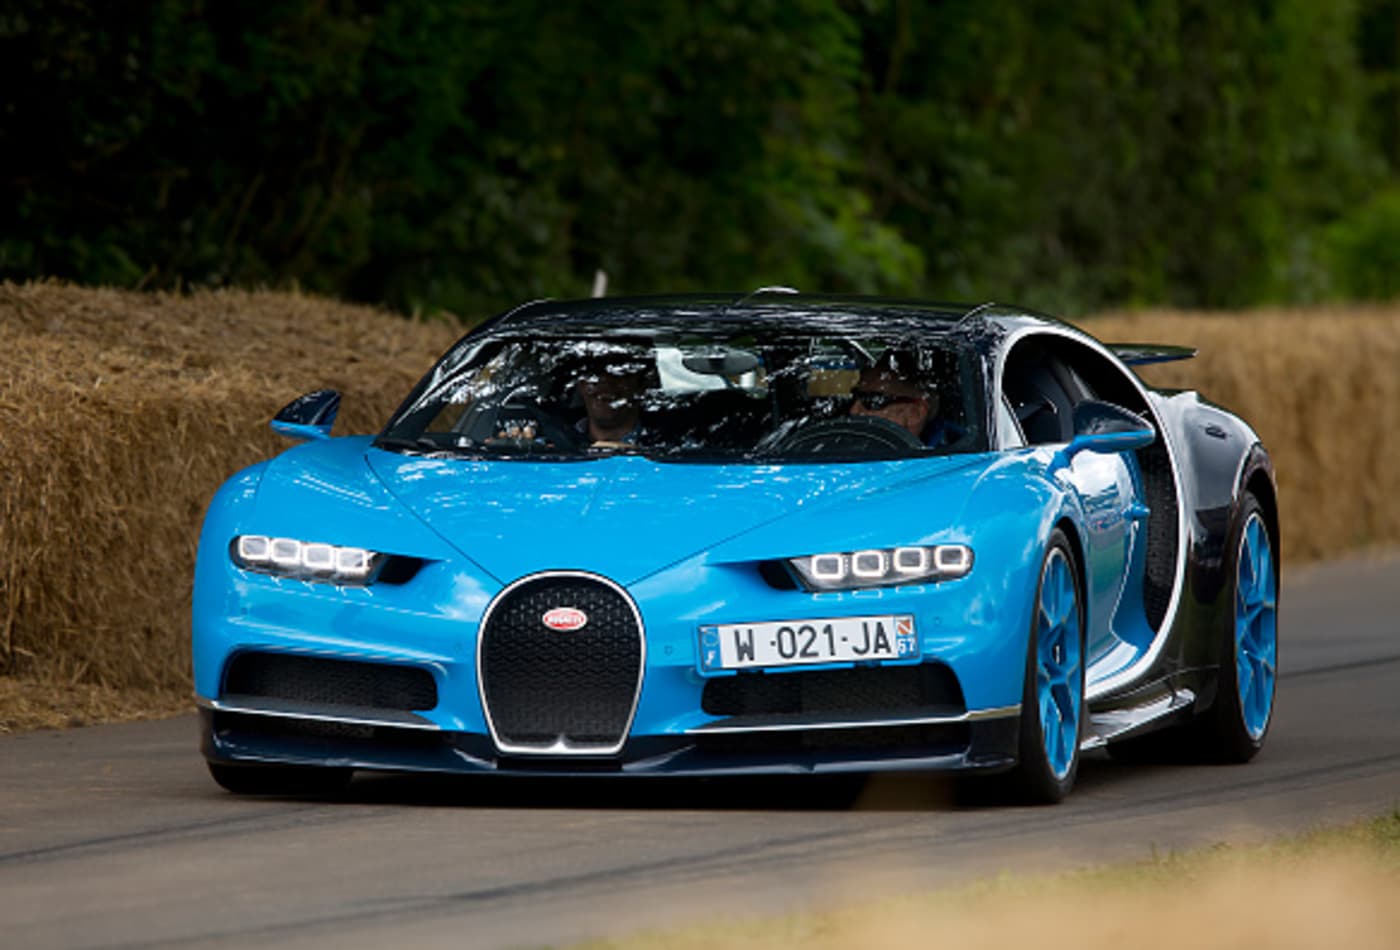 Photos: Fastest production cars in the world can cost millions